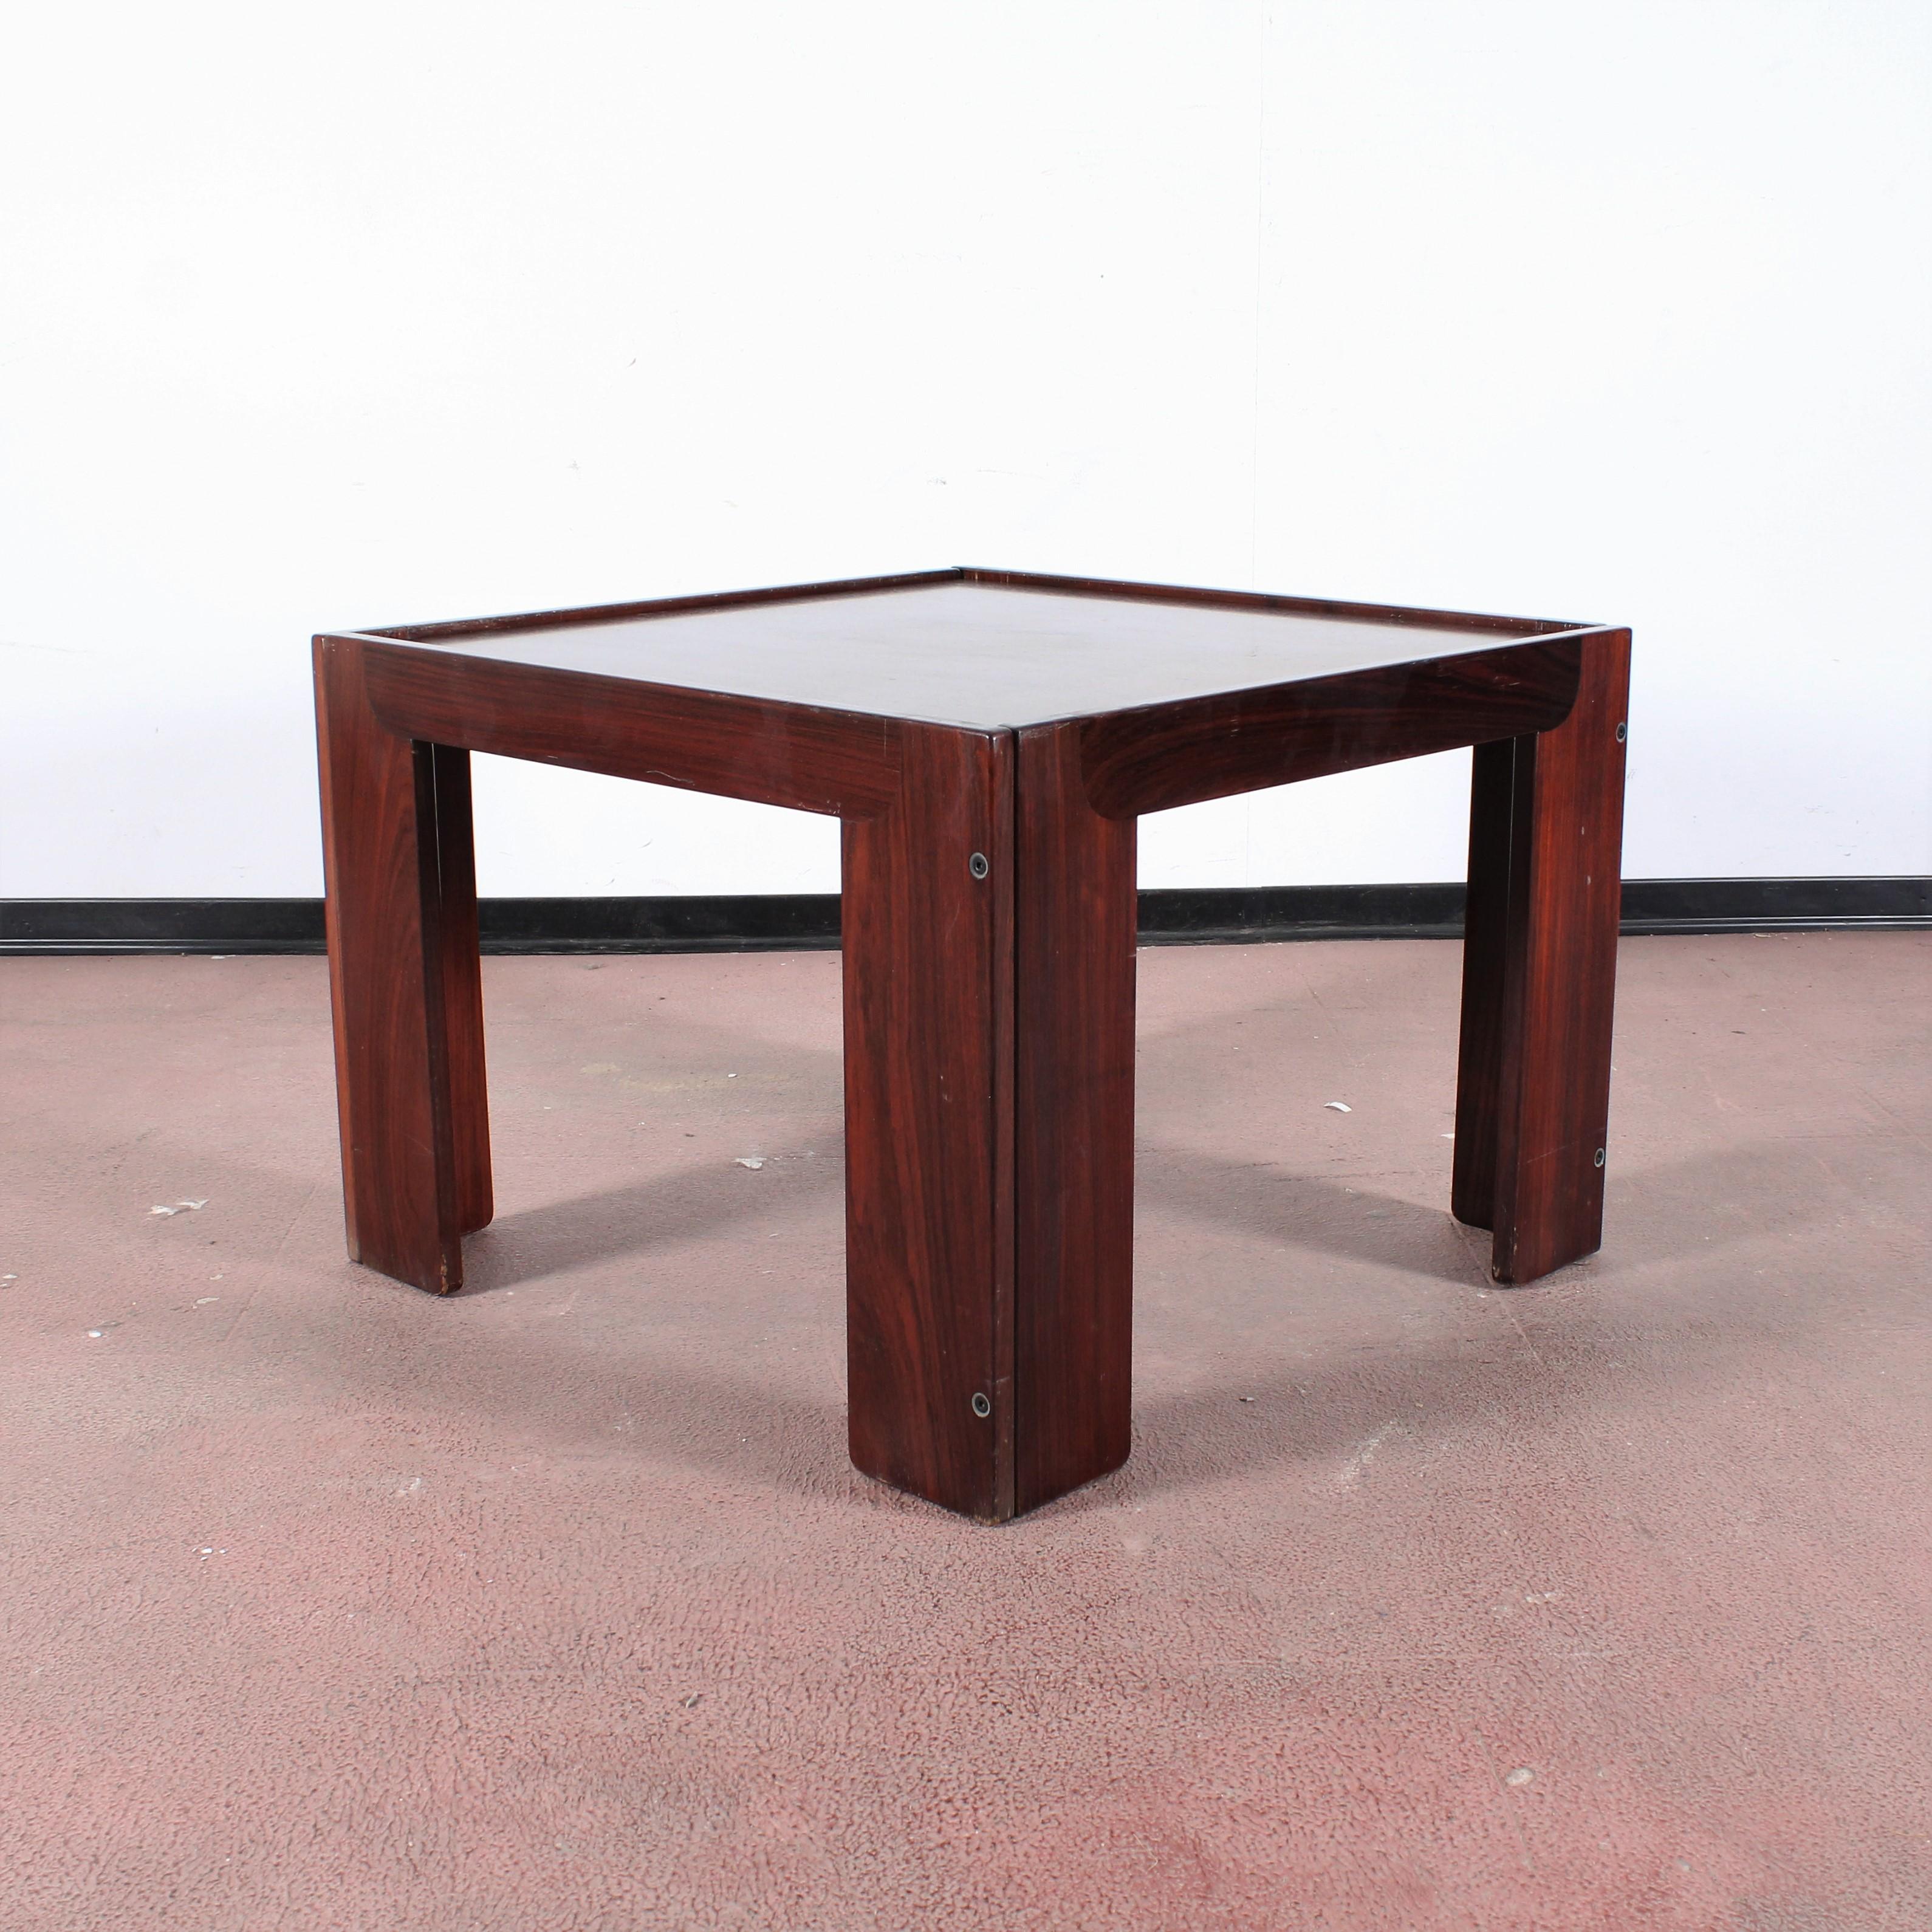 Mid-20th Century Mid-Century A. & T. Scarpa for Cassina, Meda Wood Coffee Table mod 771 '65 Italy